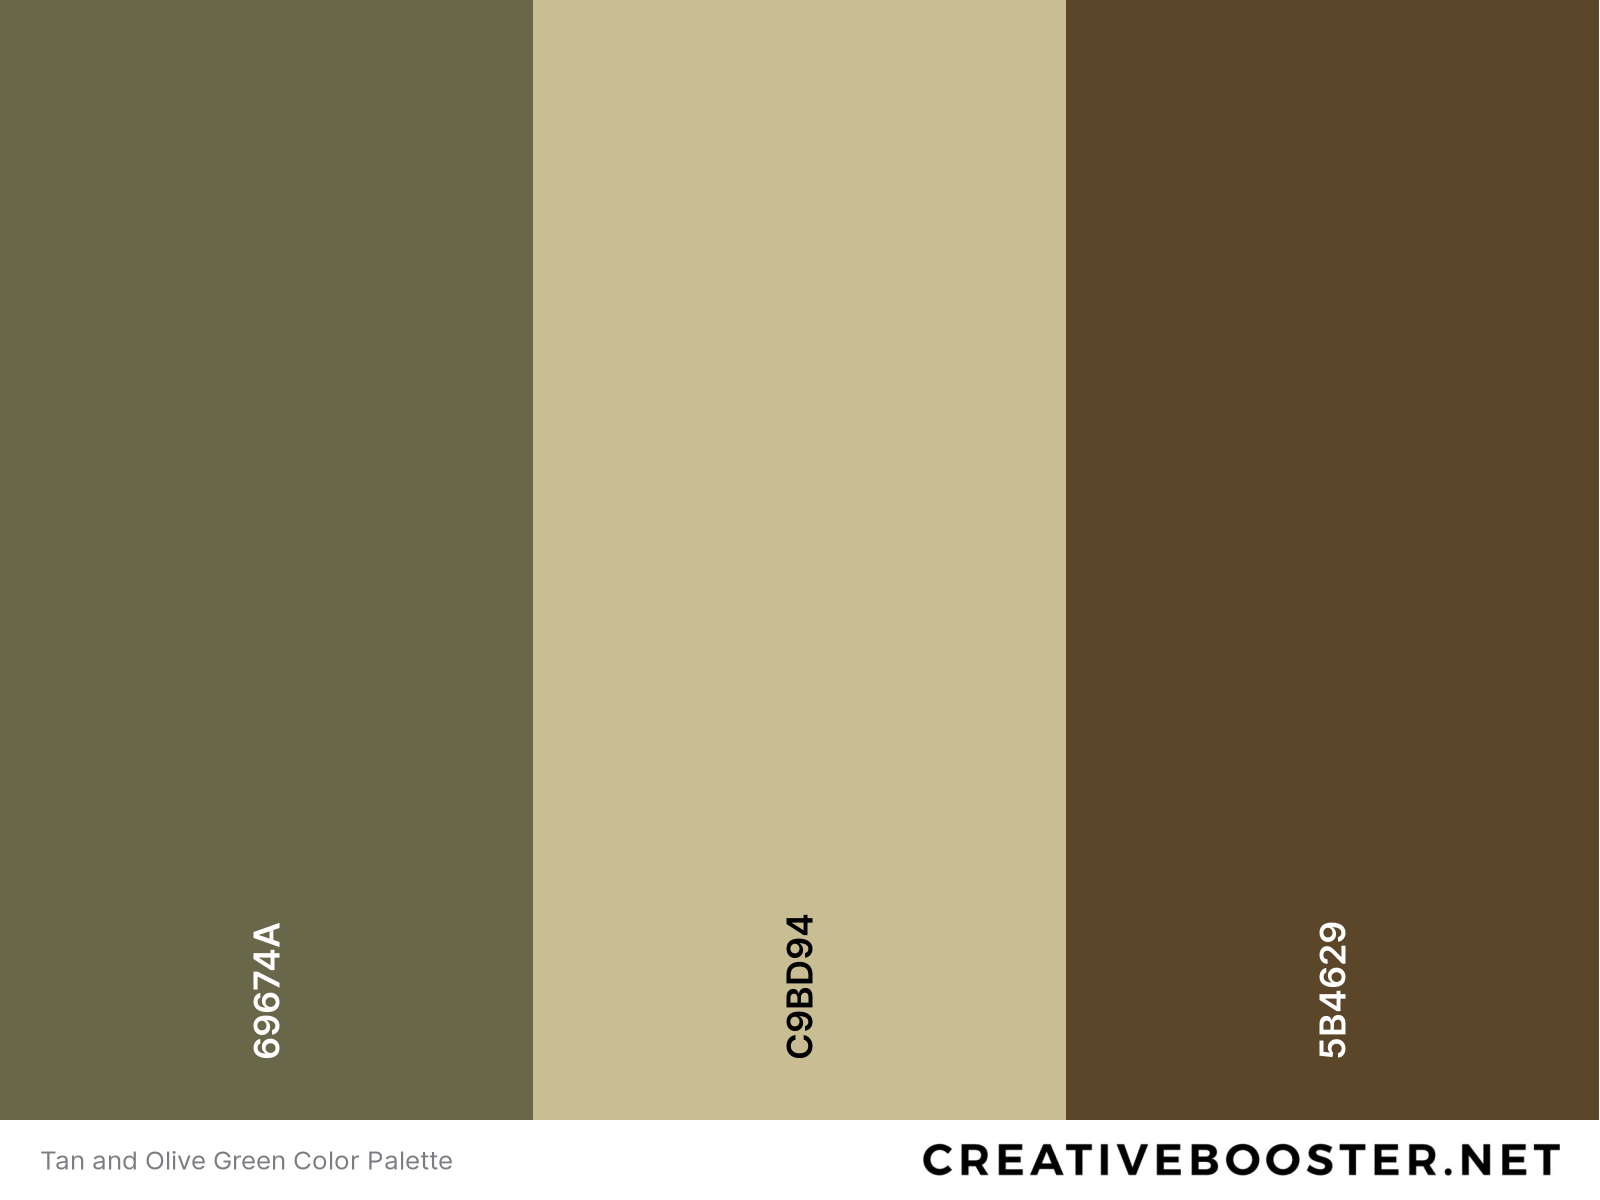 Tan and Olive Green Color Palette